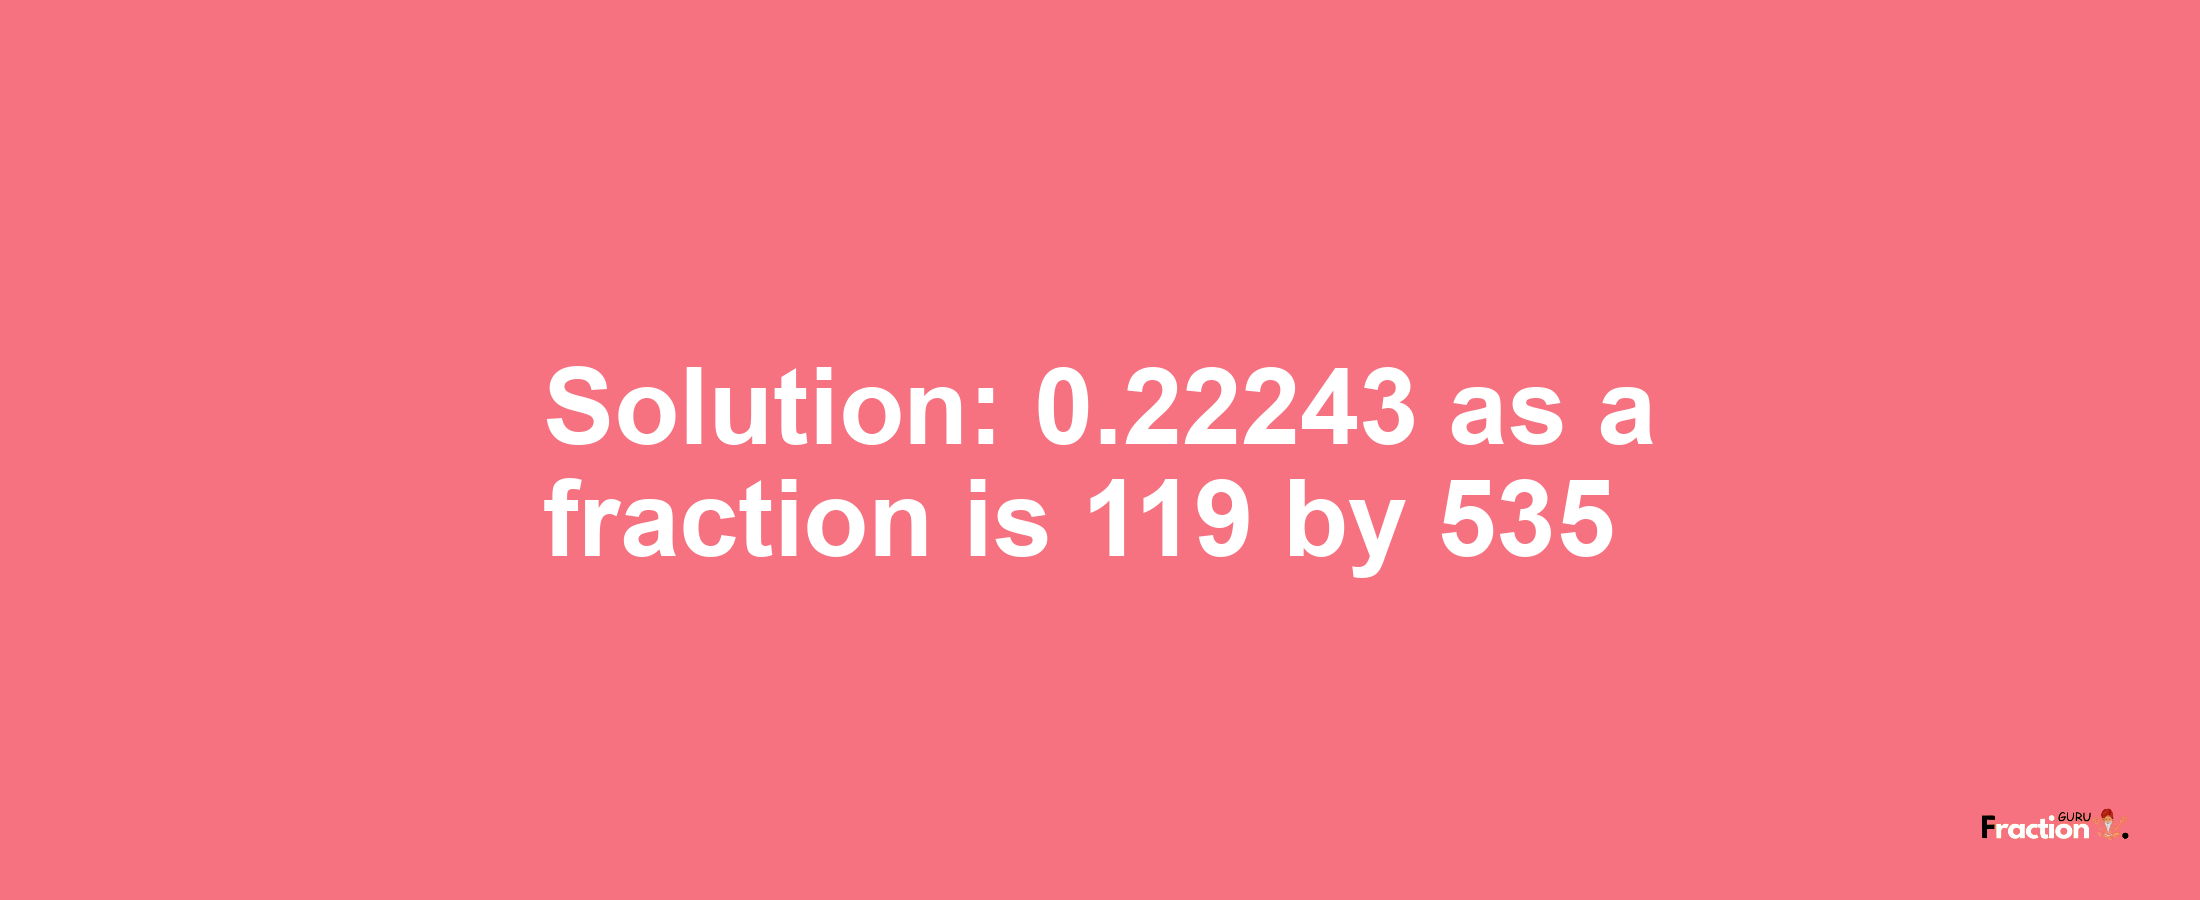 Solution:0.22243 as a fraction is 119/535